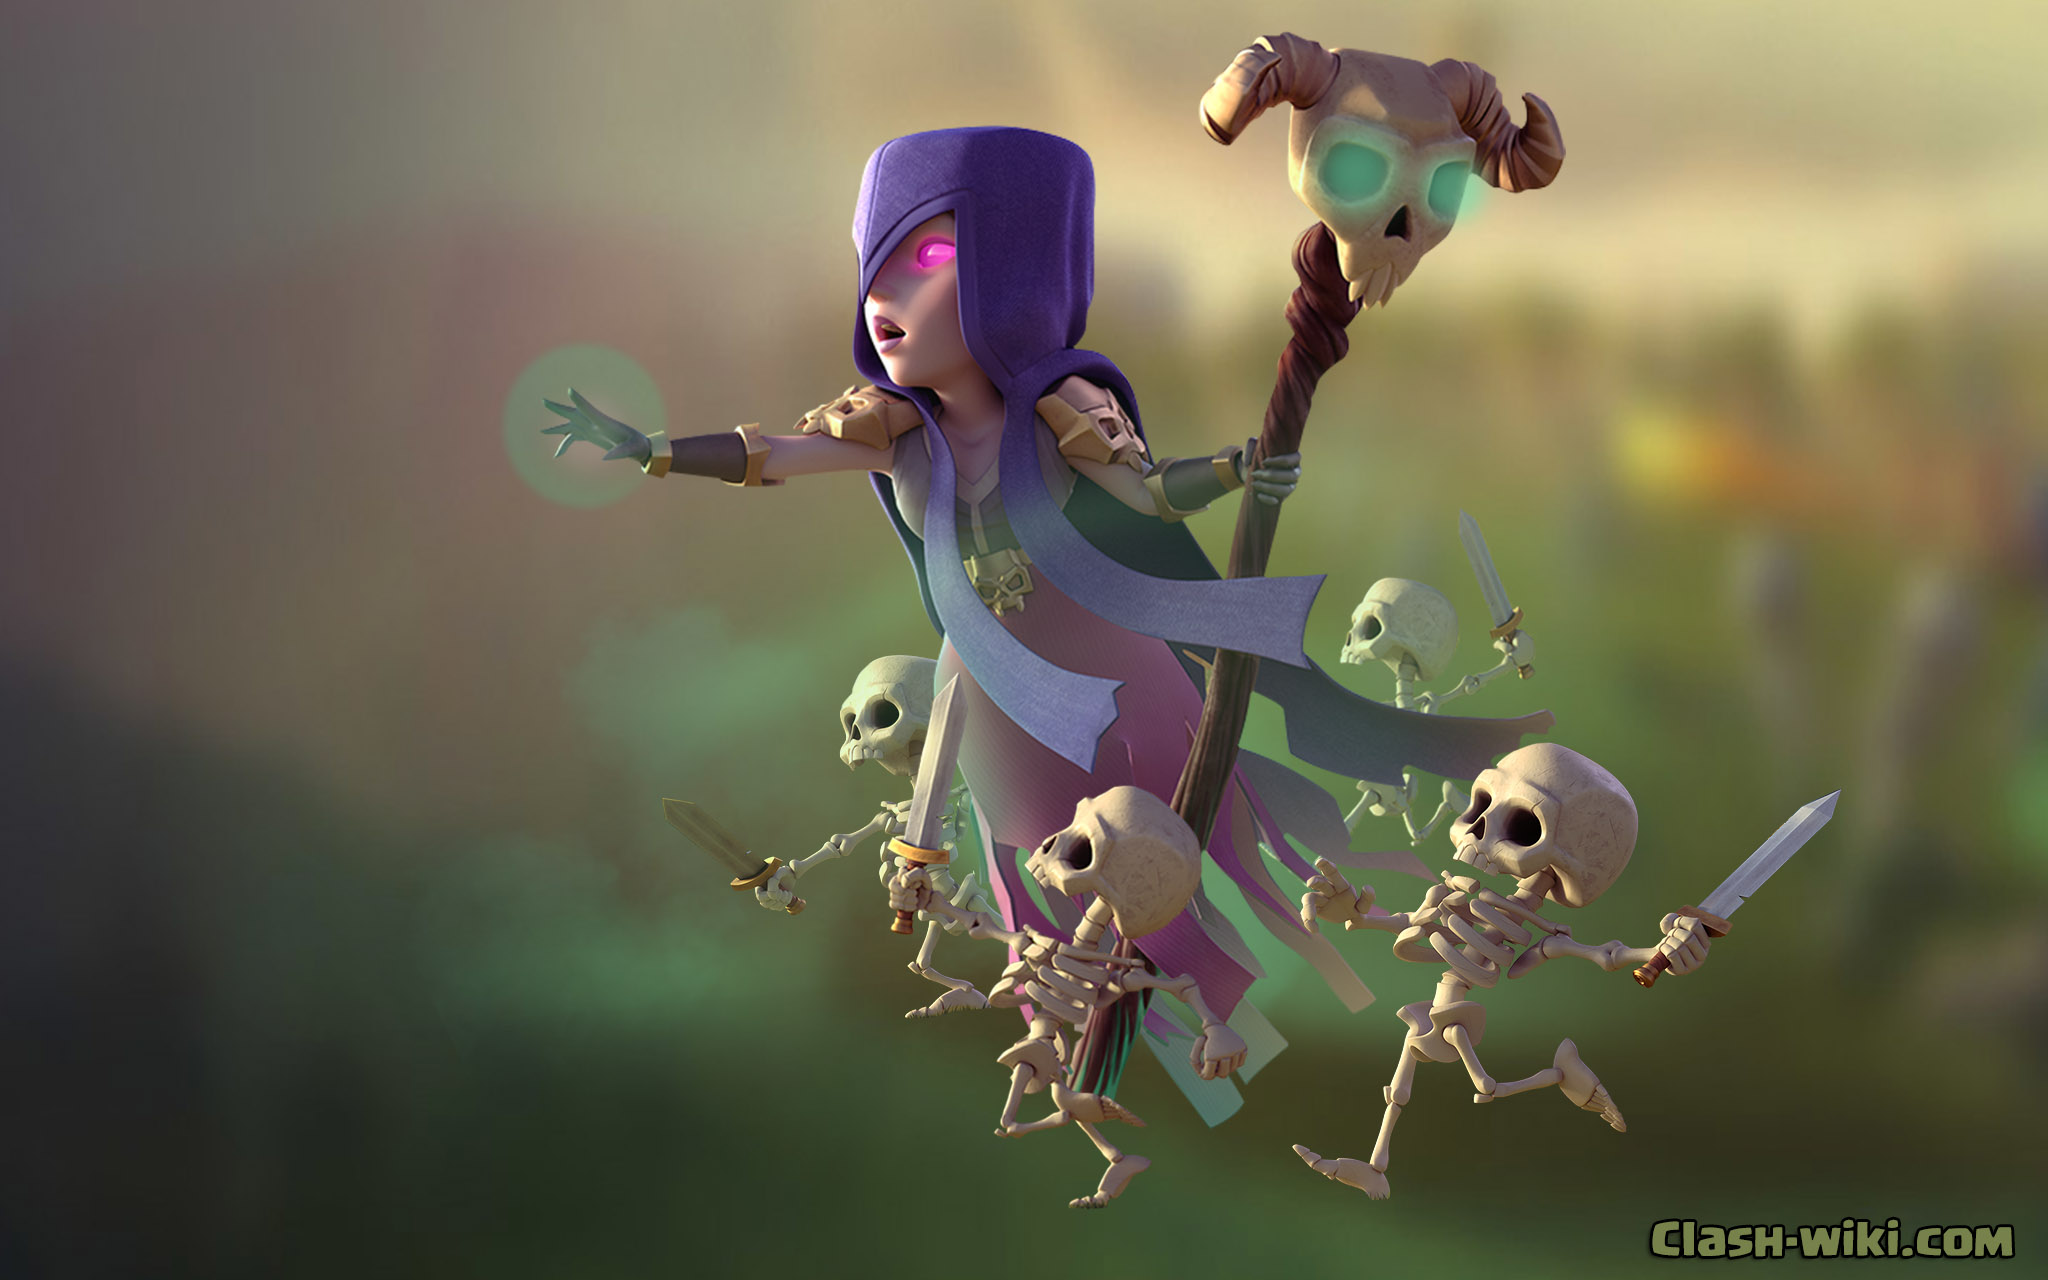 Free download Clash of Clans Wallpapers clash wikicom [2048x1280] for your  Desktop, Mobile & Tablet | Explore 95+ Giant Clash Of Clans Wallpapers |  Giant MTB Wallpaper, Giant Squid Wallpaper, Clash of